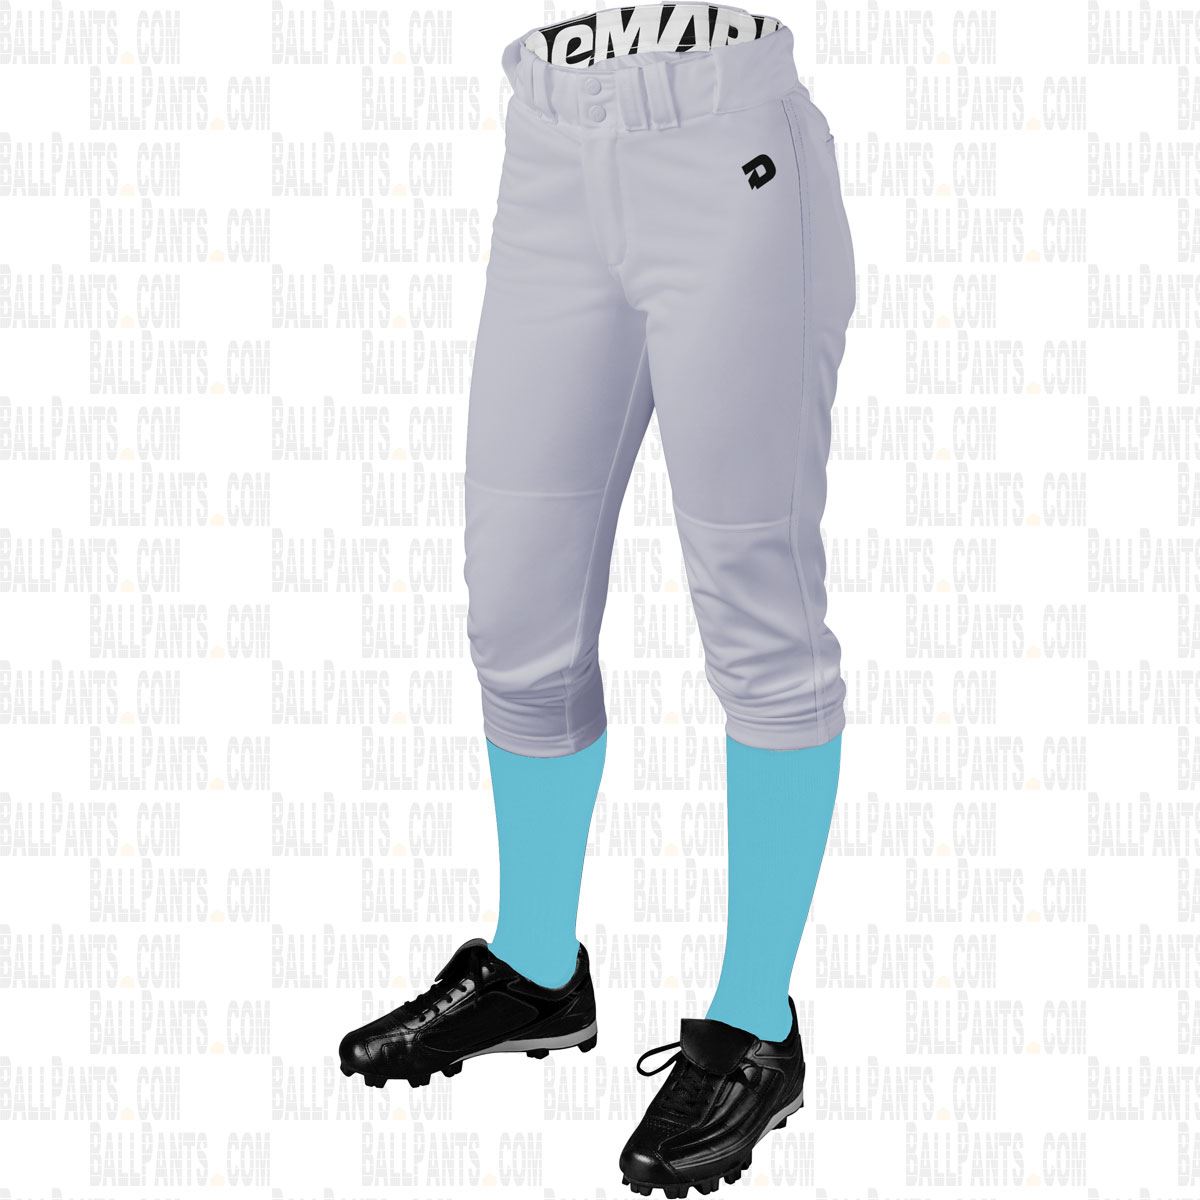 DeMarini Deluxe Adult Womens Fastpitch Softball Pants w/ Custom Piping WTC7605CP 